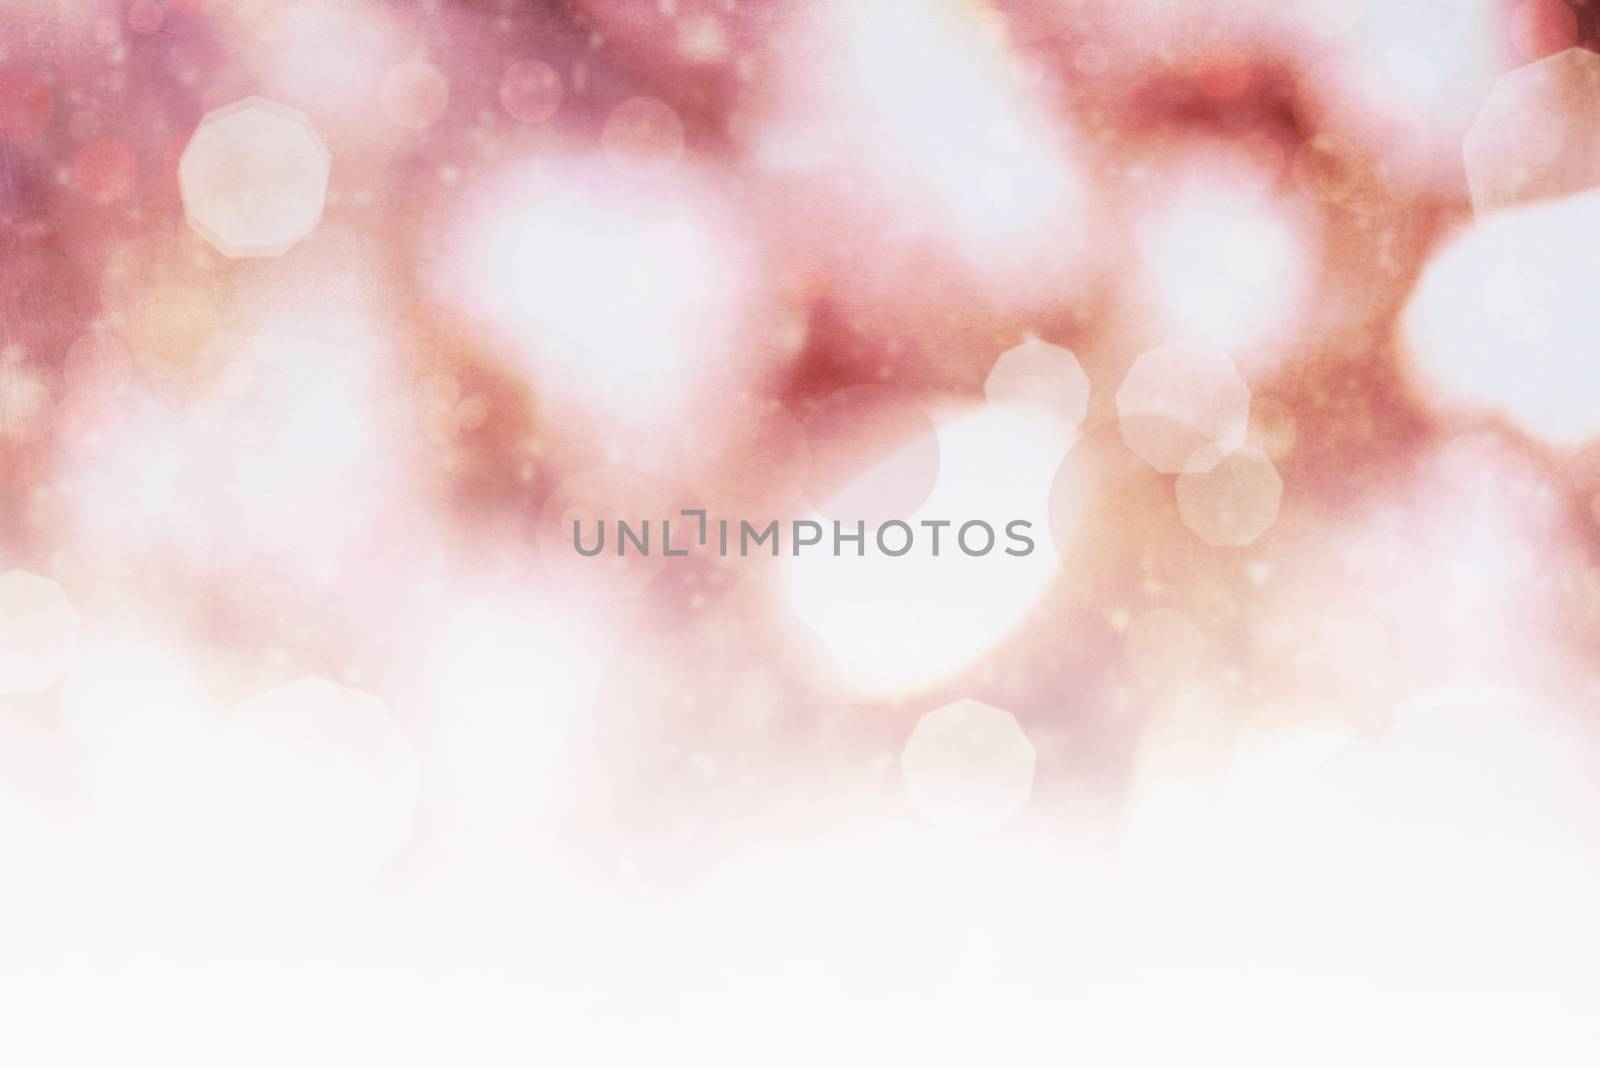 Abstract retro textured background of red holiday lights with copy space. 